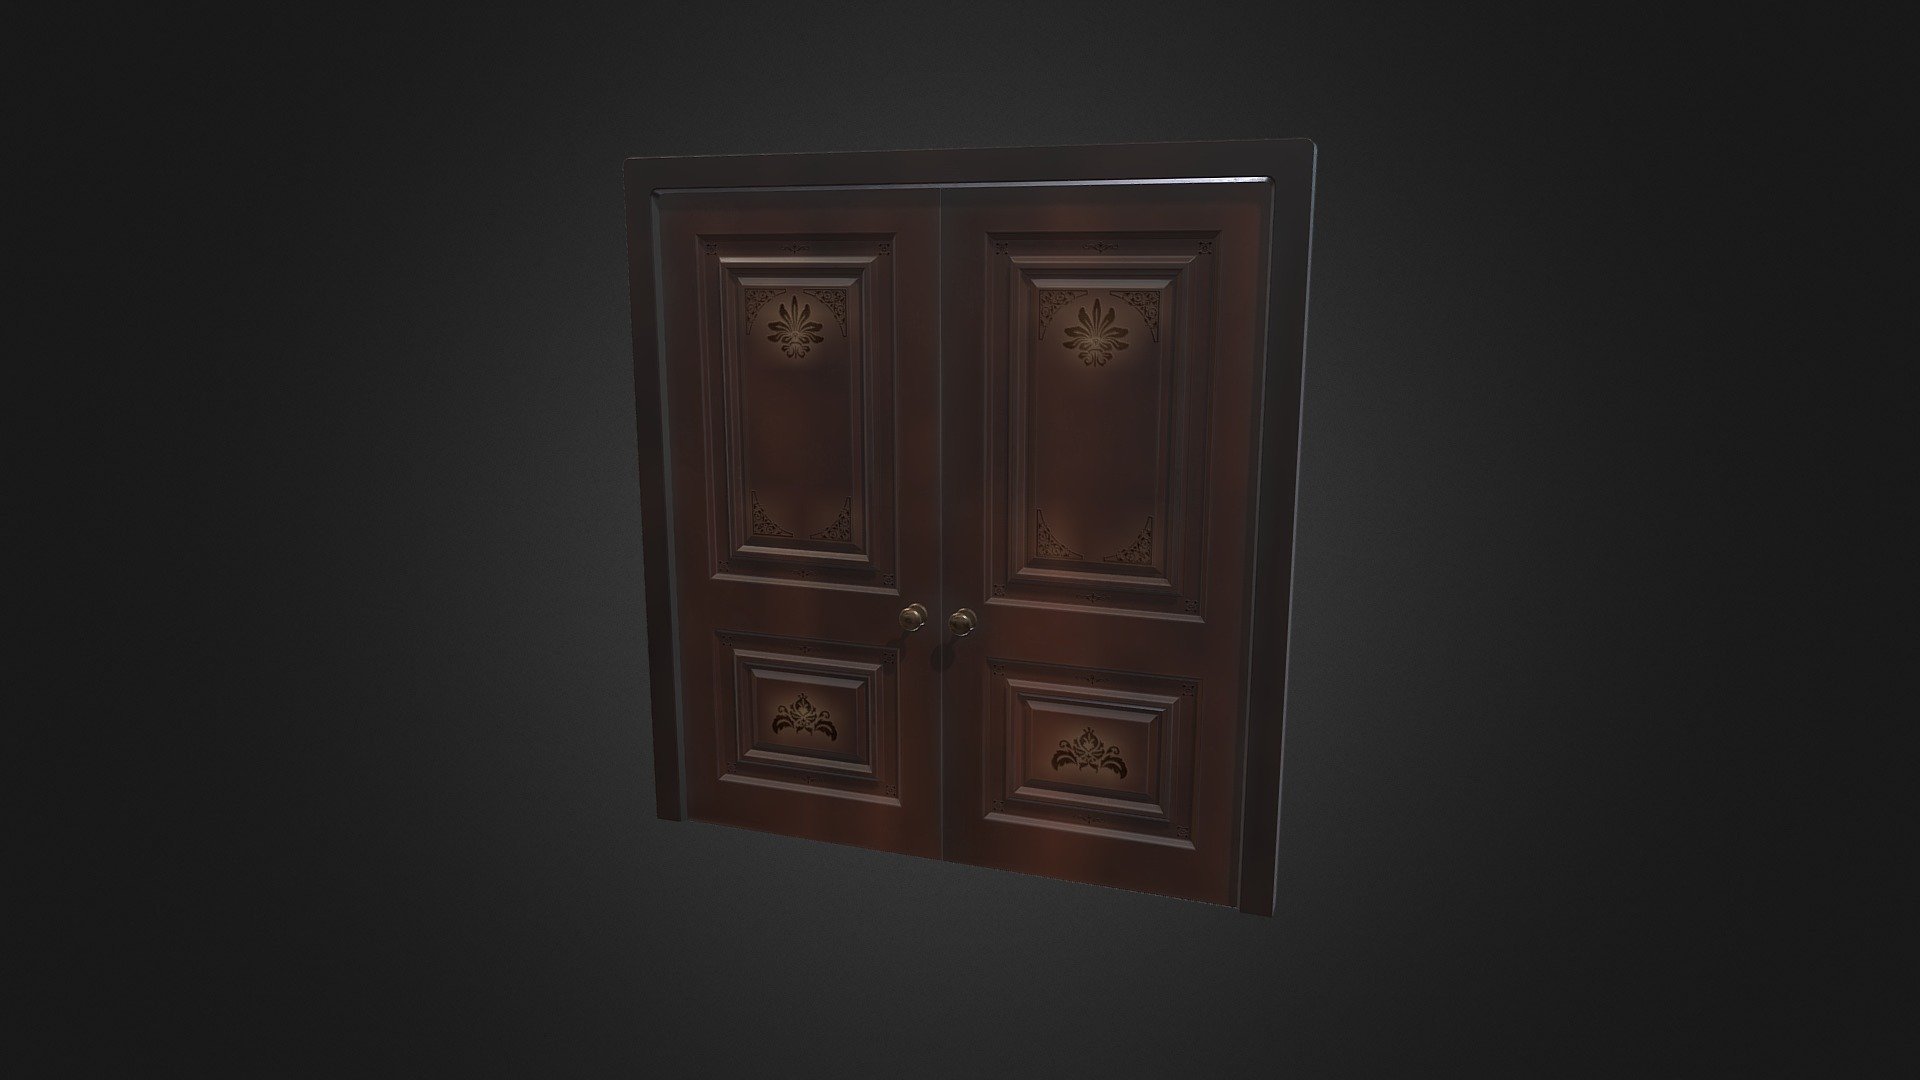 Theatre Interior Wooden Doors

Game asset made as part of my MA Game Design studies

Created in Maya and textured using Substance Painter - Interior Wooden Doors - 3D model by blkelly 3d model